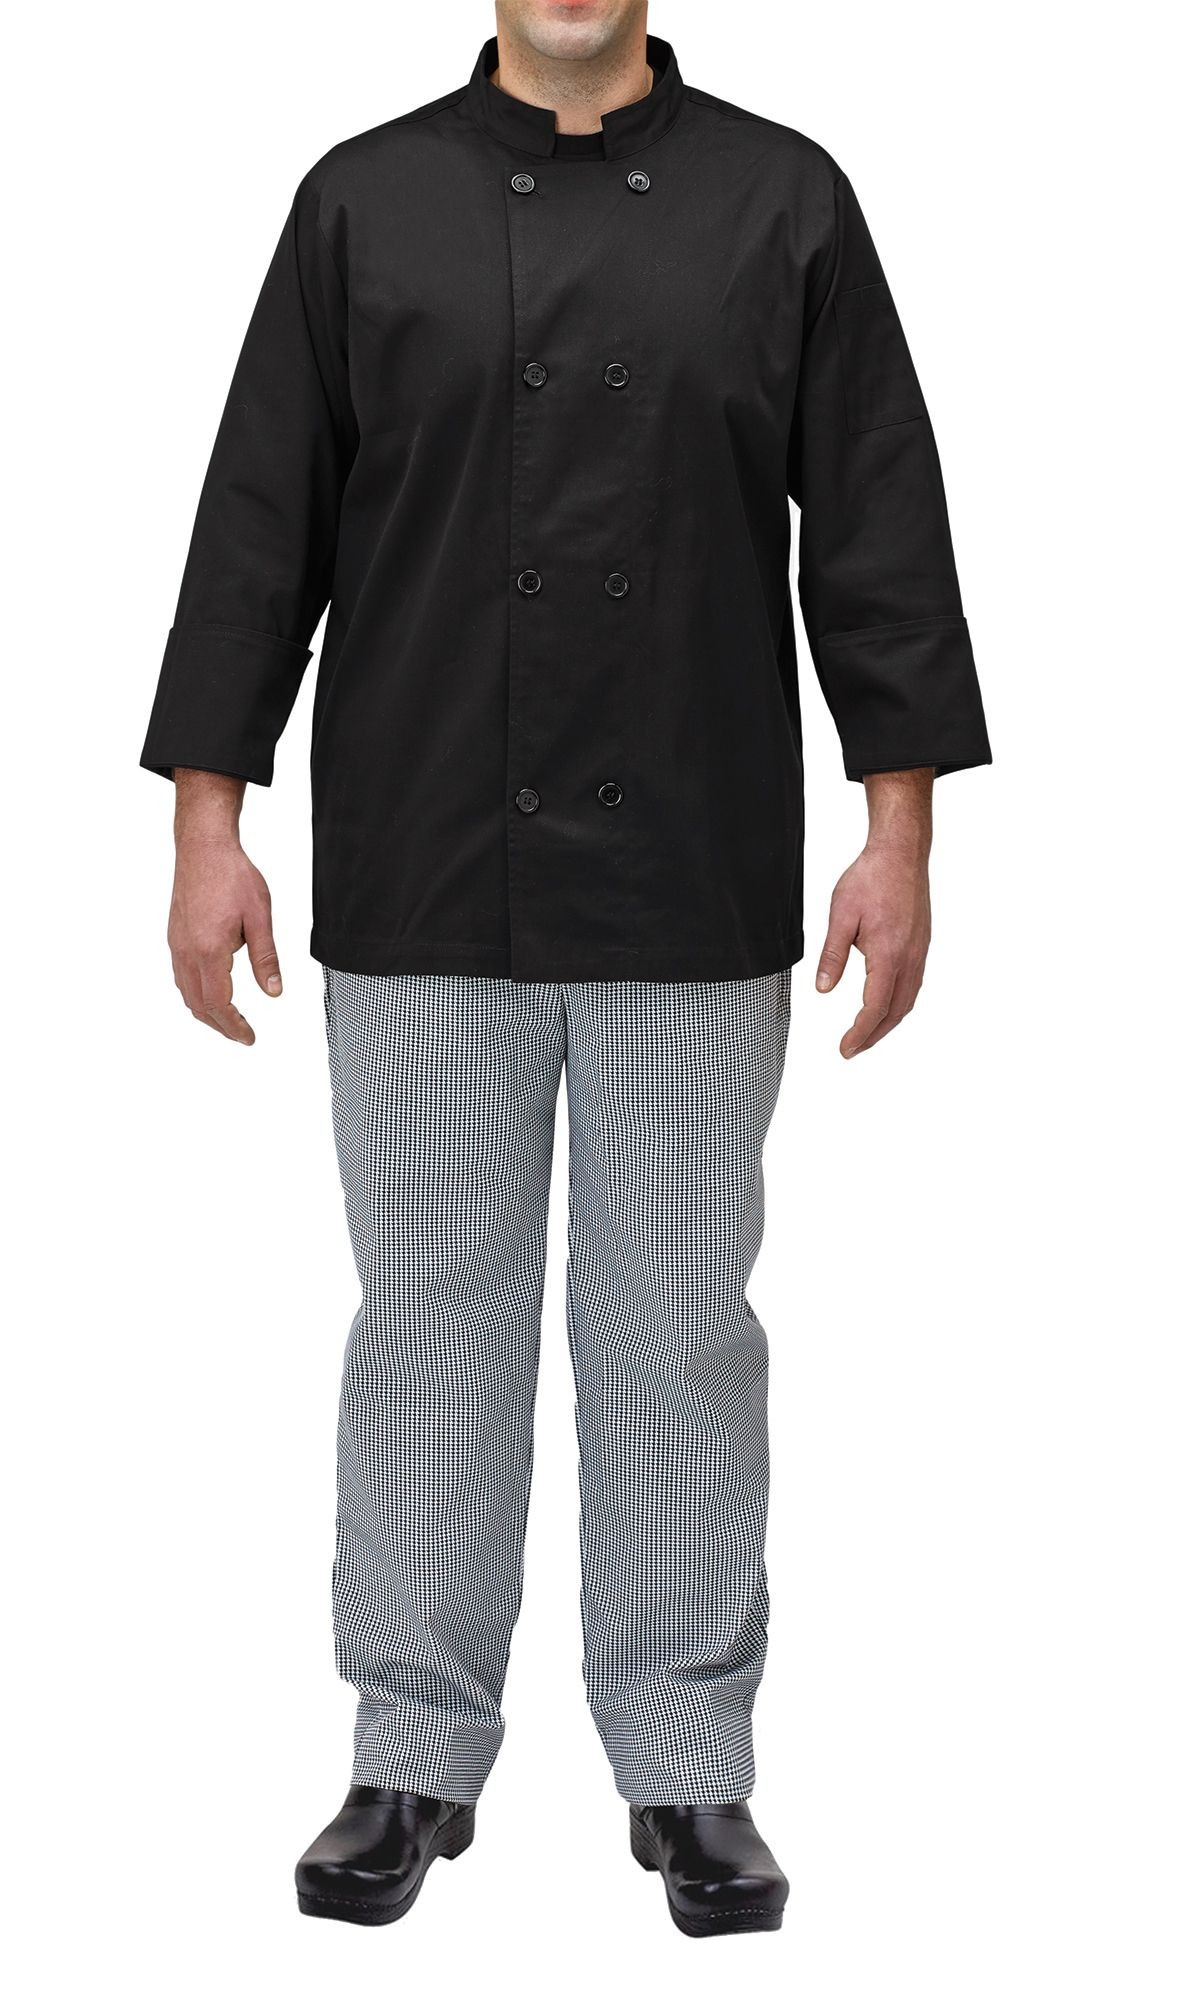 Winco UNF-5KXXL Black Poly-Cotton Blend Double Breasted Chef Jacket with Pocket, 2X-Large